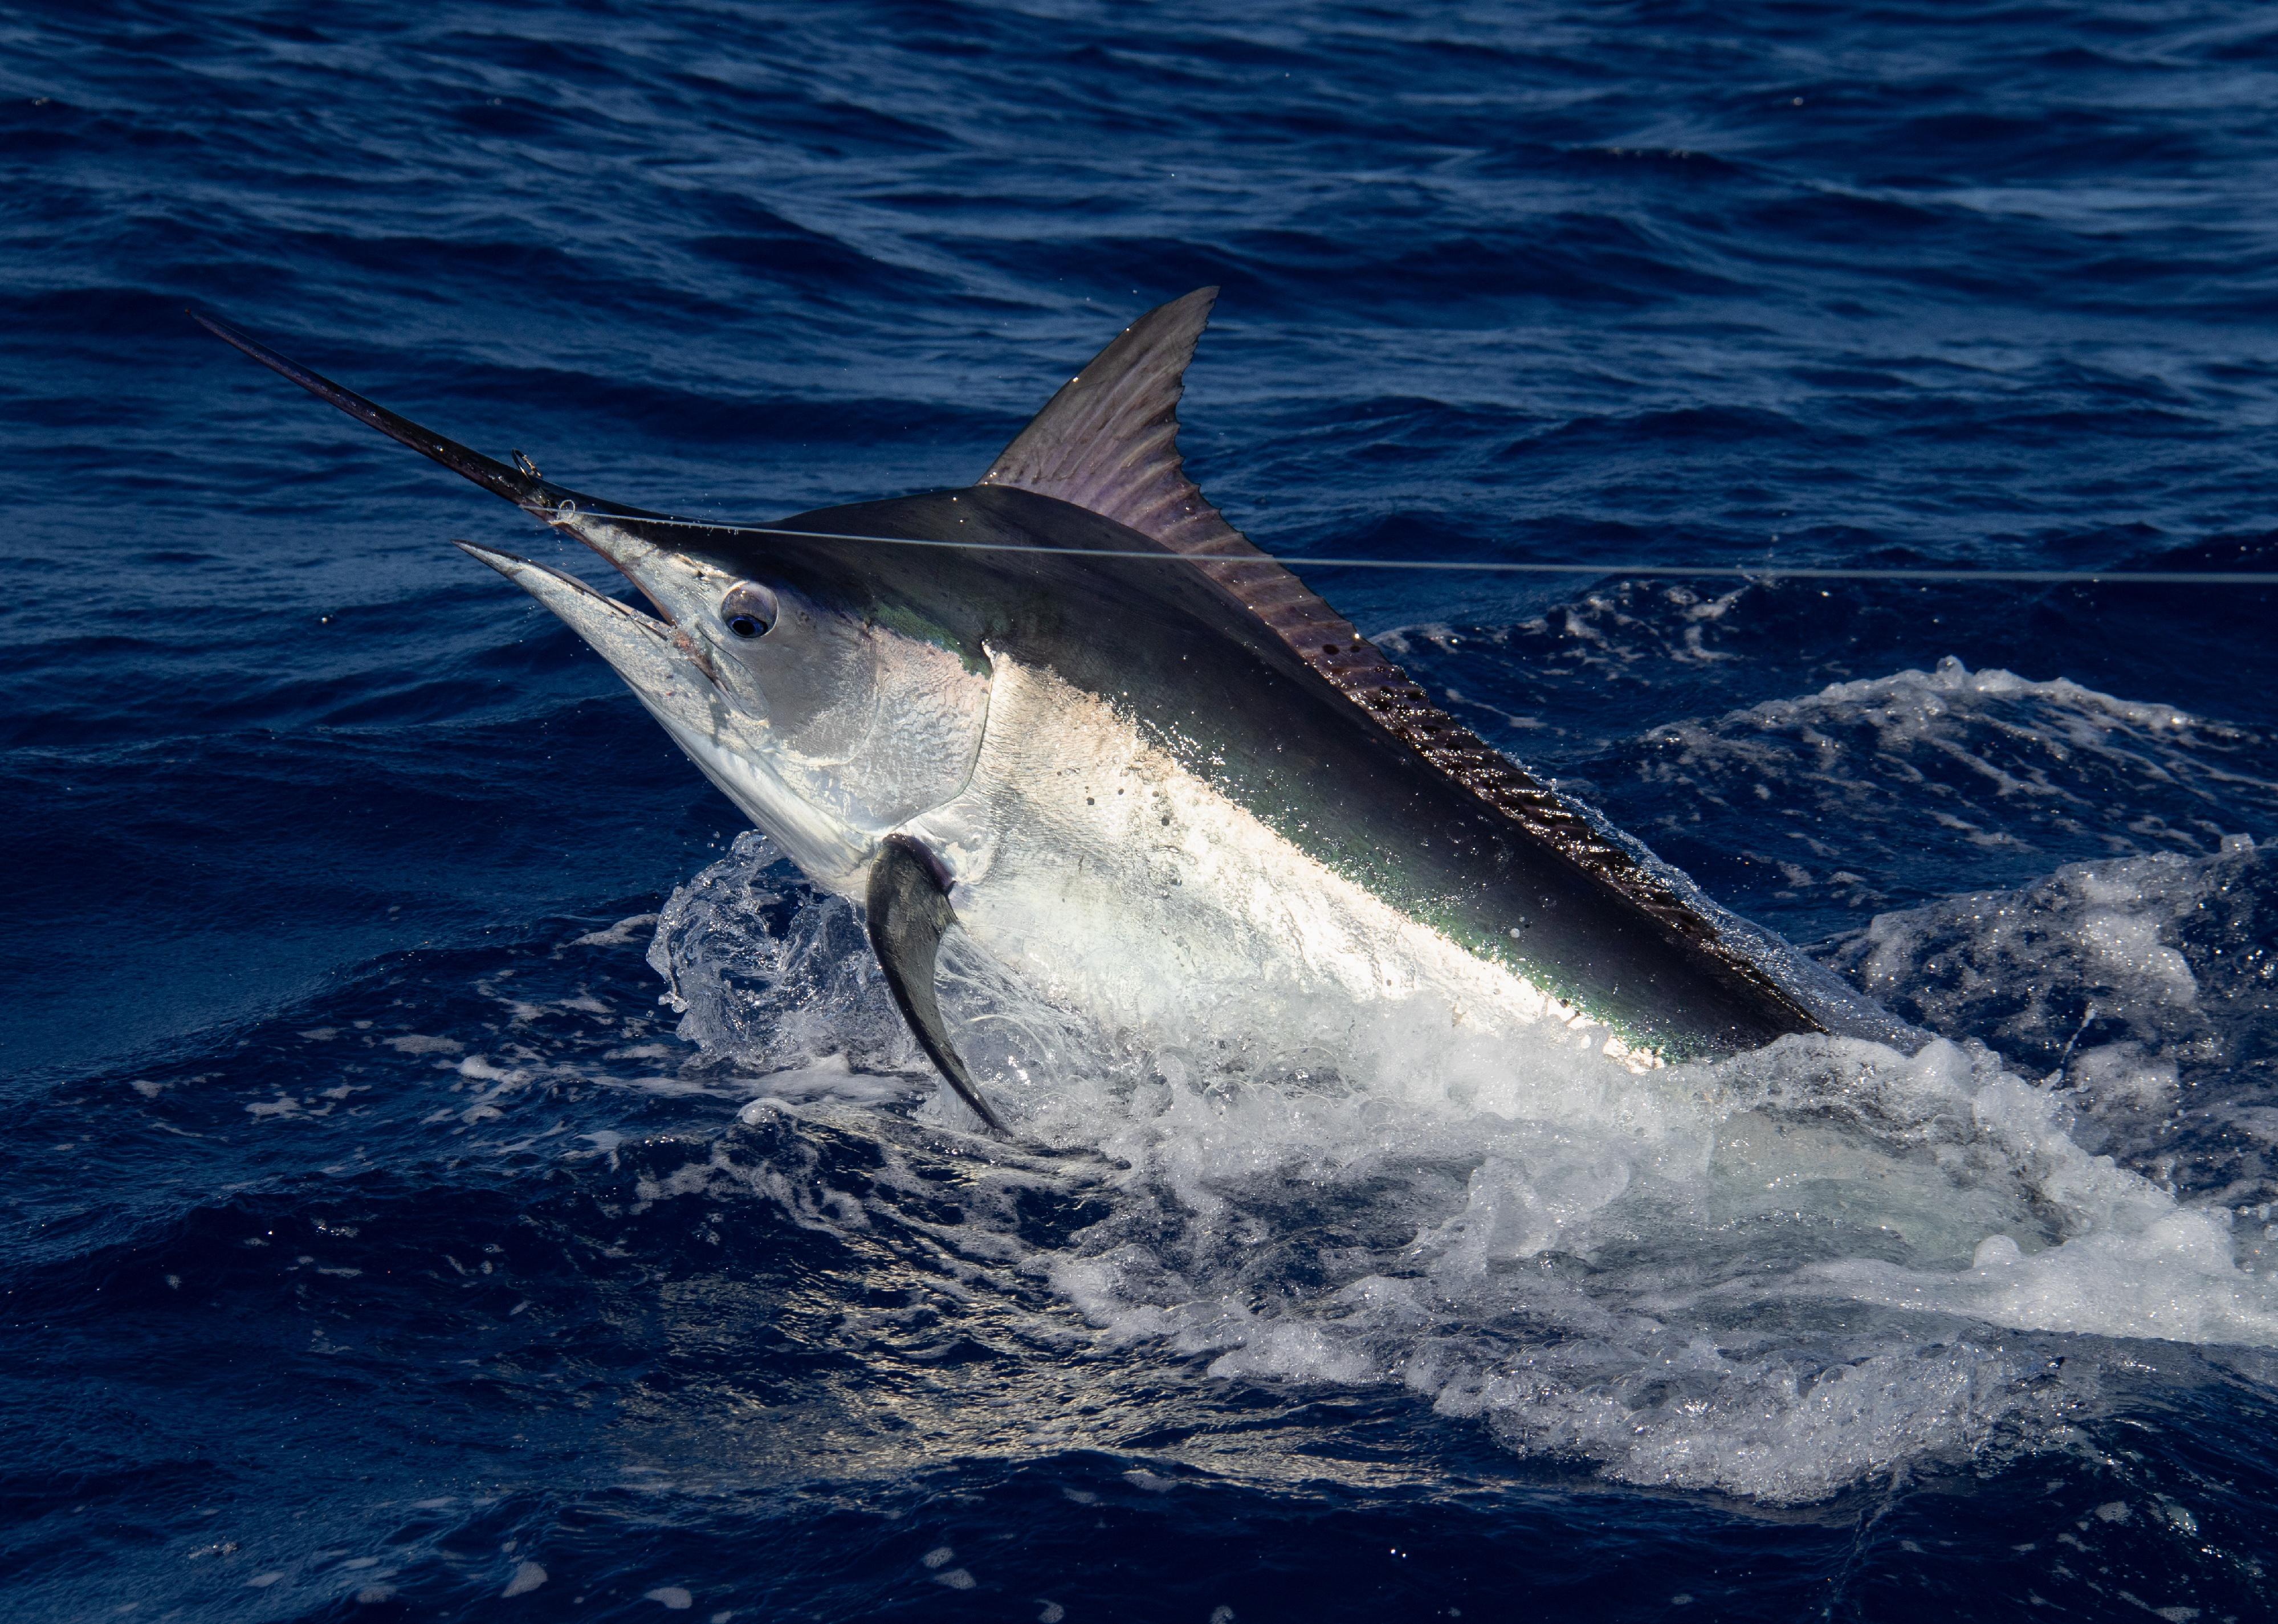 Black Marlin jumping out of the water.